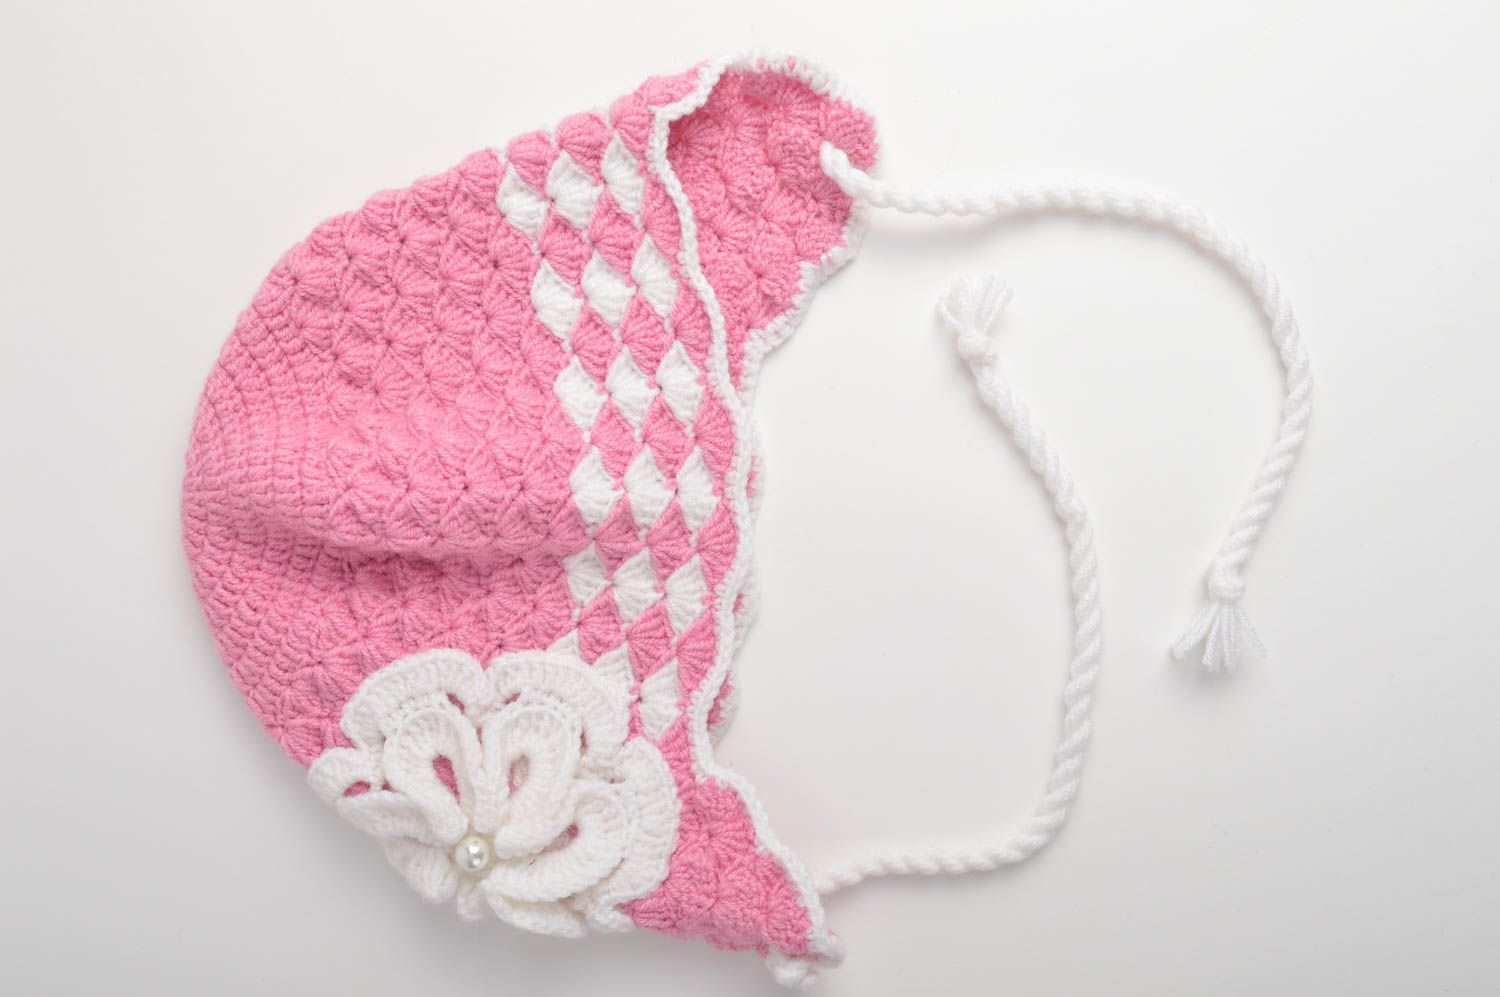 Handmade crochet baby hat hats for girls crochet hats for babies gifts for kids photo 3